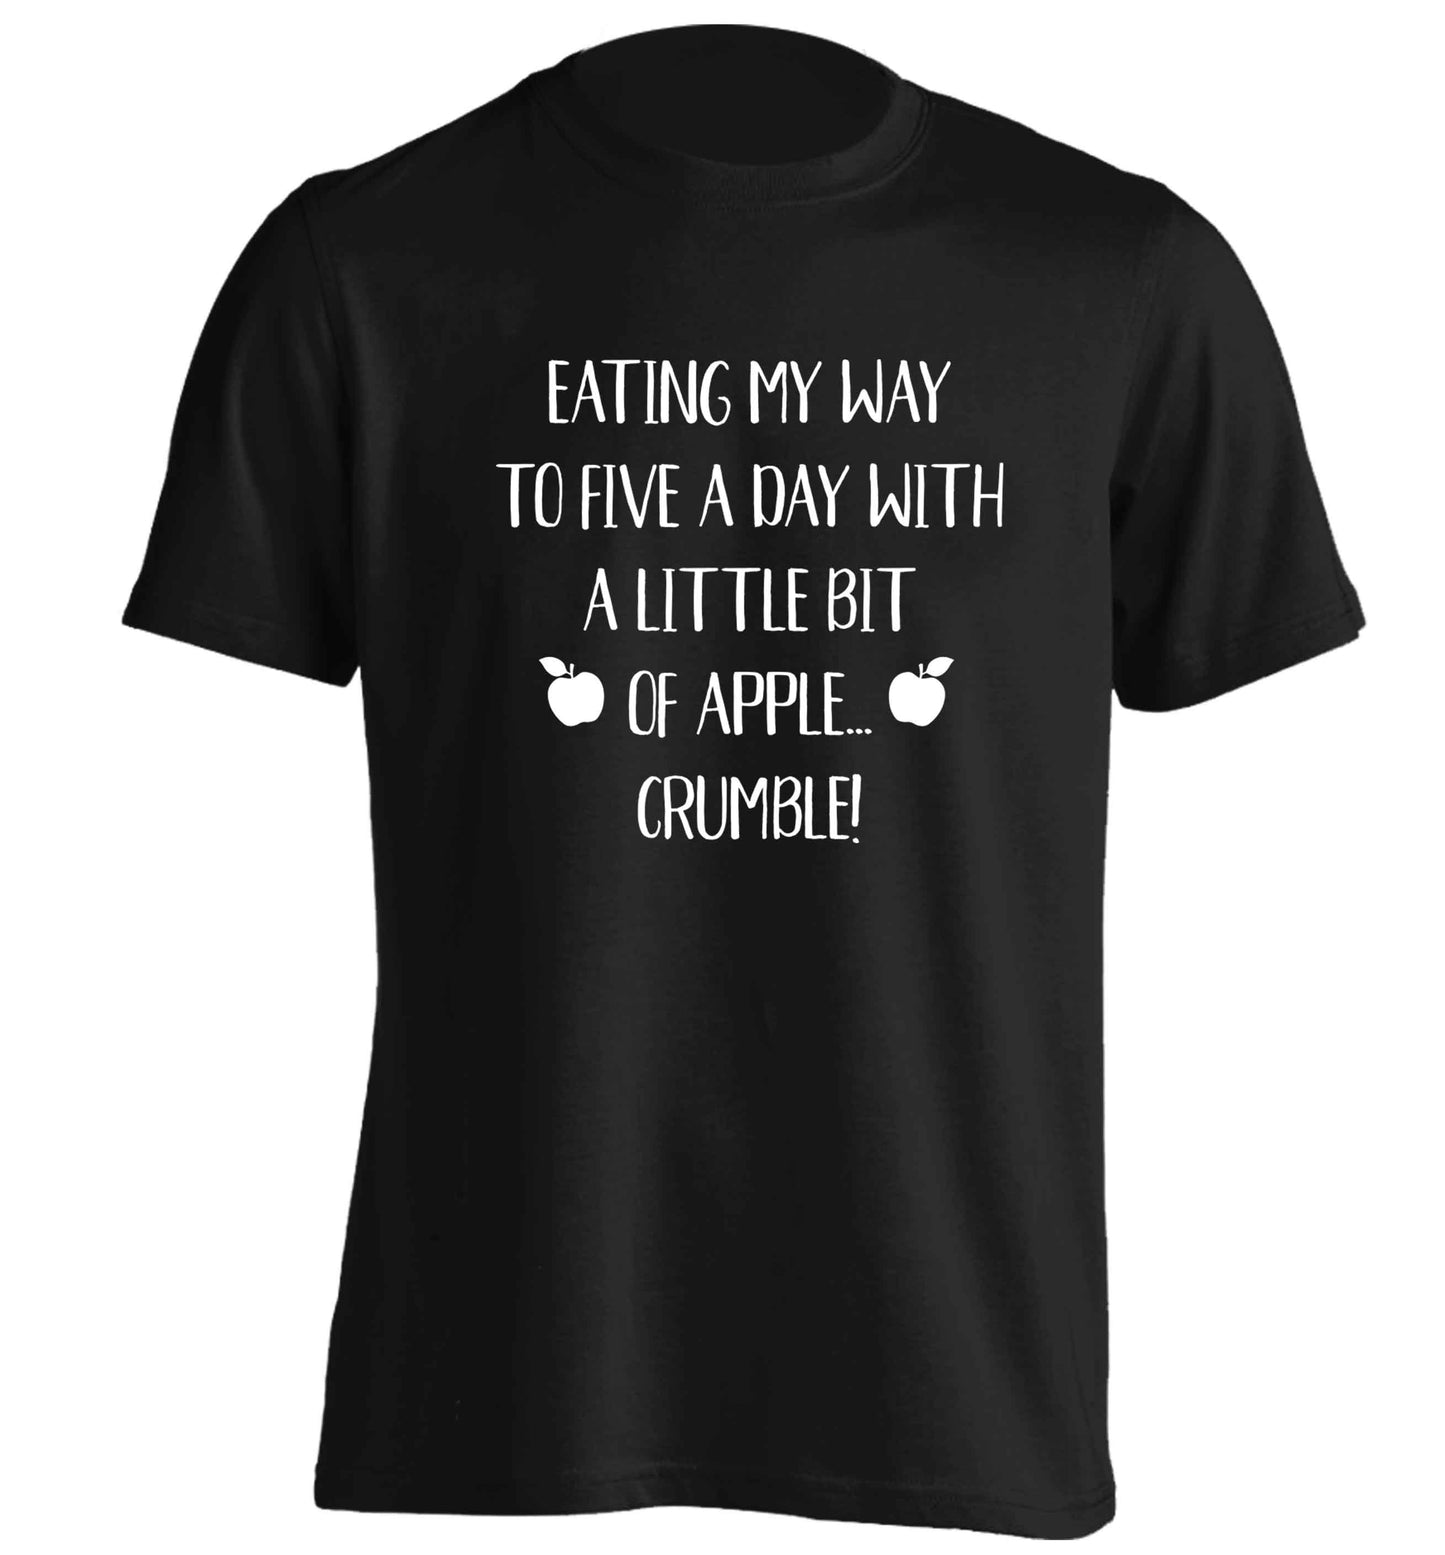 Eating my way to five a day with a little bit of apple crumble adults unisex black Tshirt 2XL